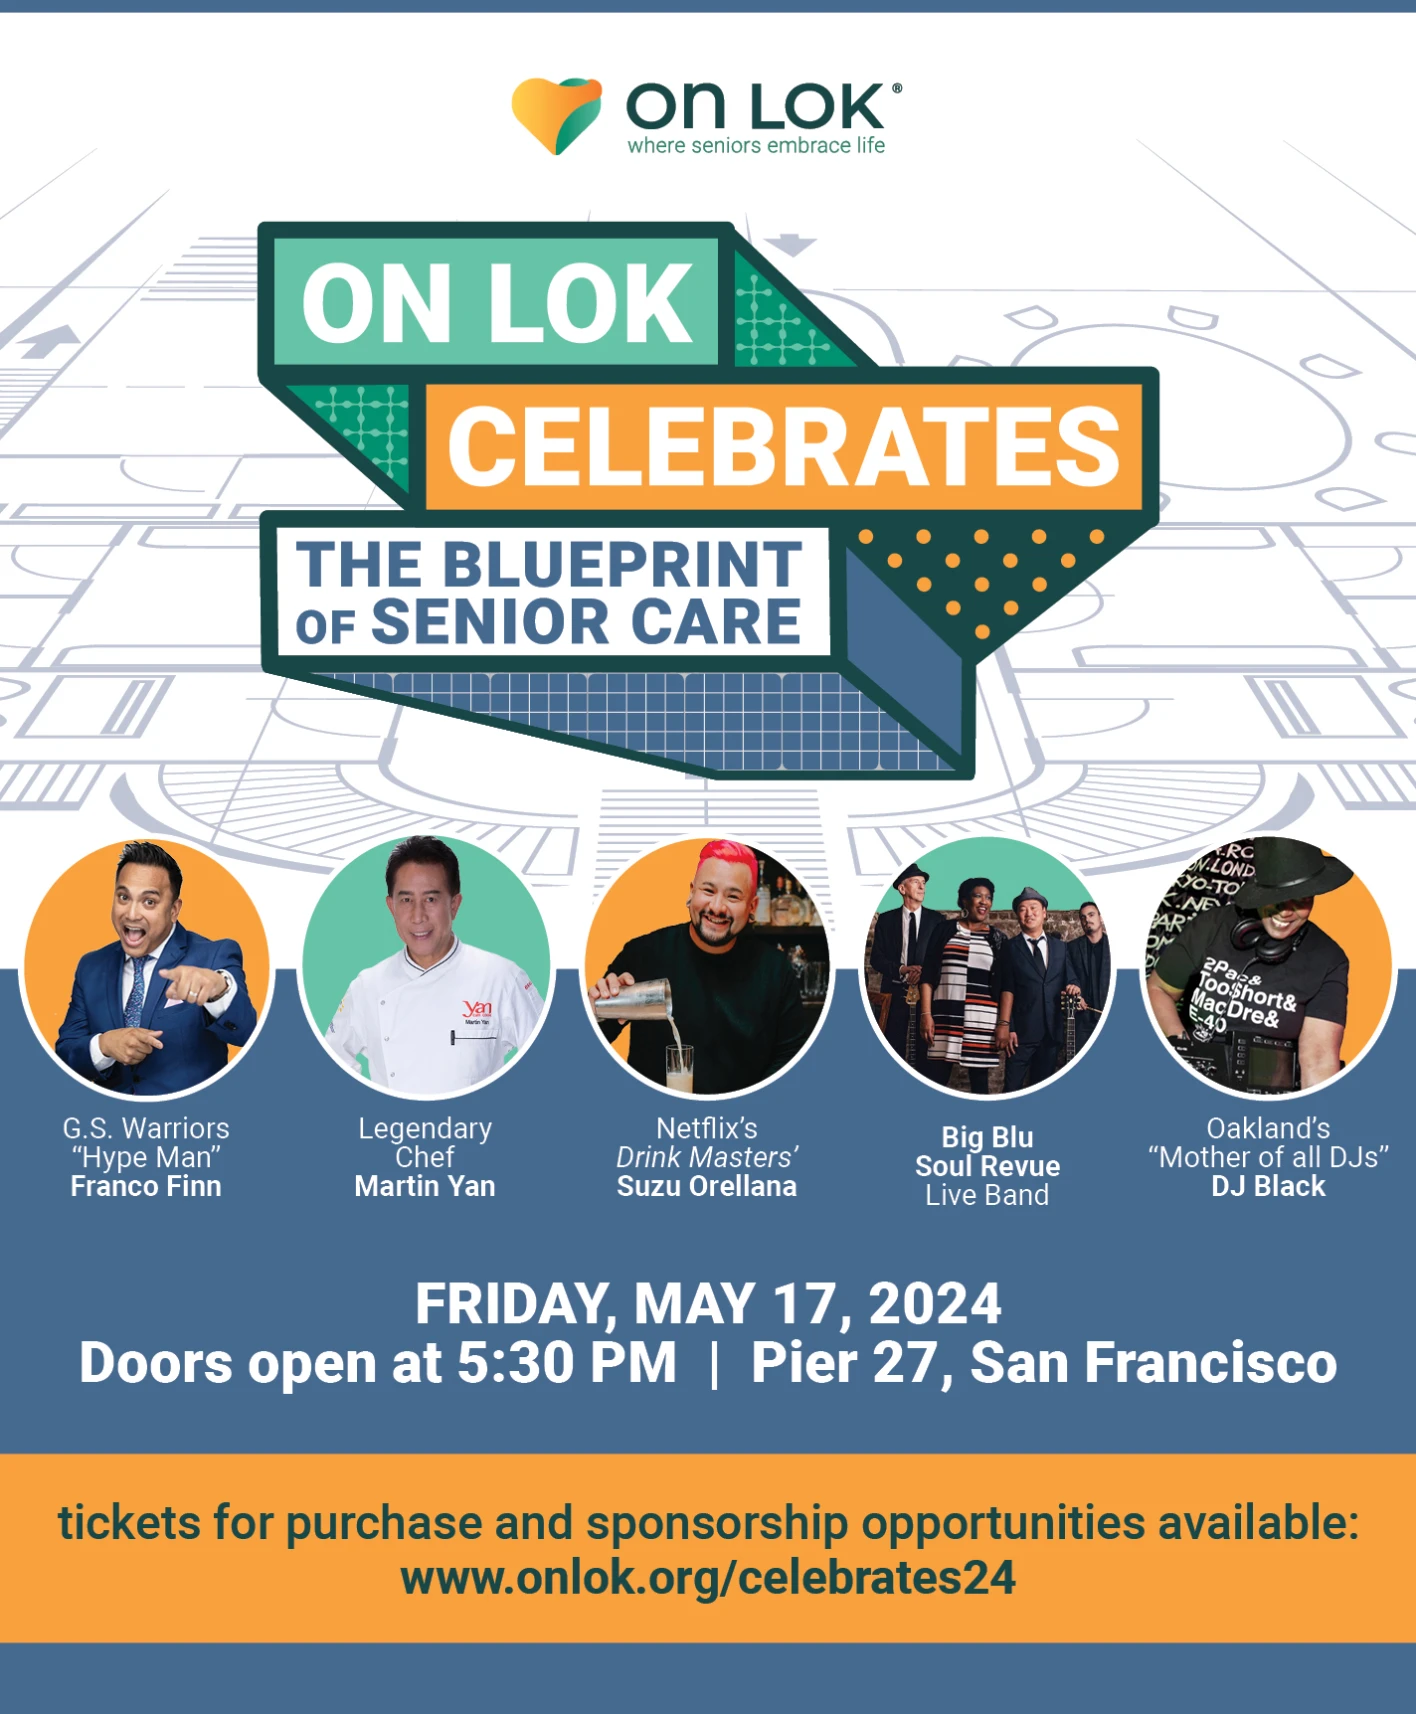 Flyer for the 2024 On Lok Celebrates Gala happening at Pier 27 in San Francisco, CA. Image includes the lineup of events, including Franco Finn, Chef Martin Yan, Suzu Orellana, Big Blu Soul Revue, and DJ Black.